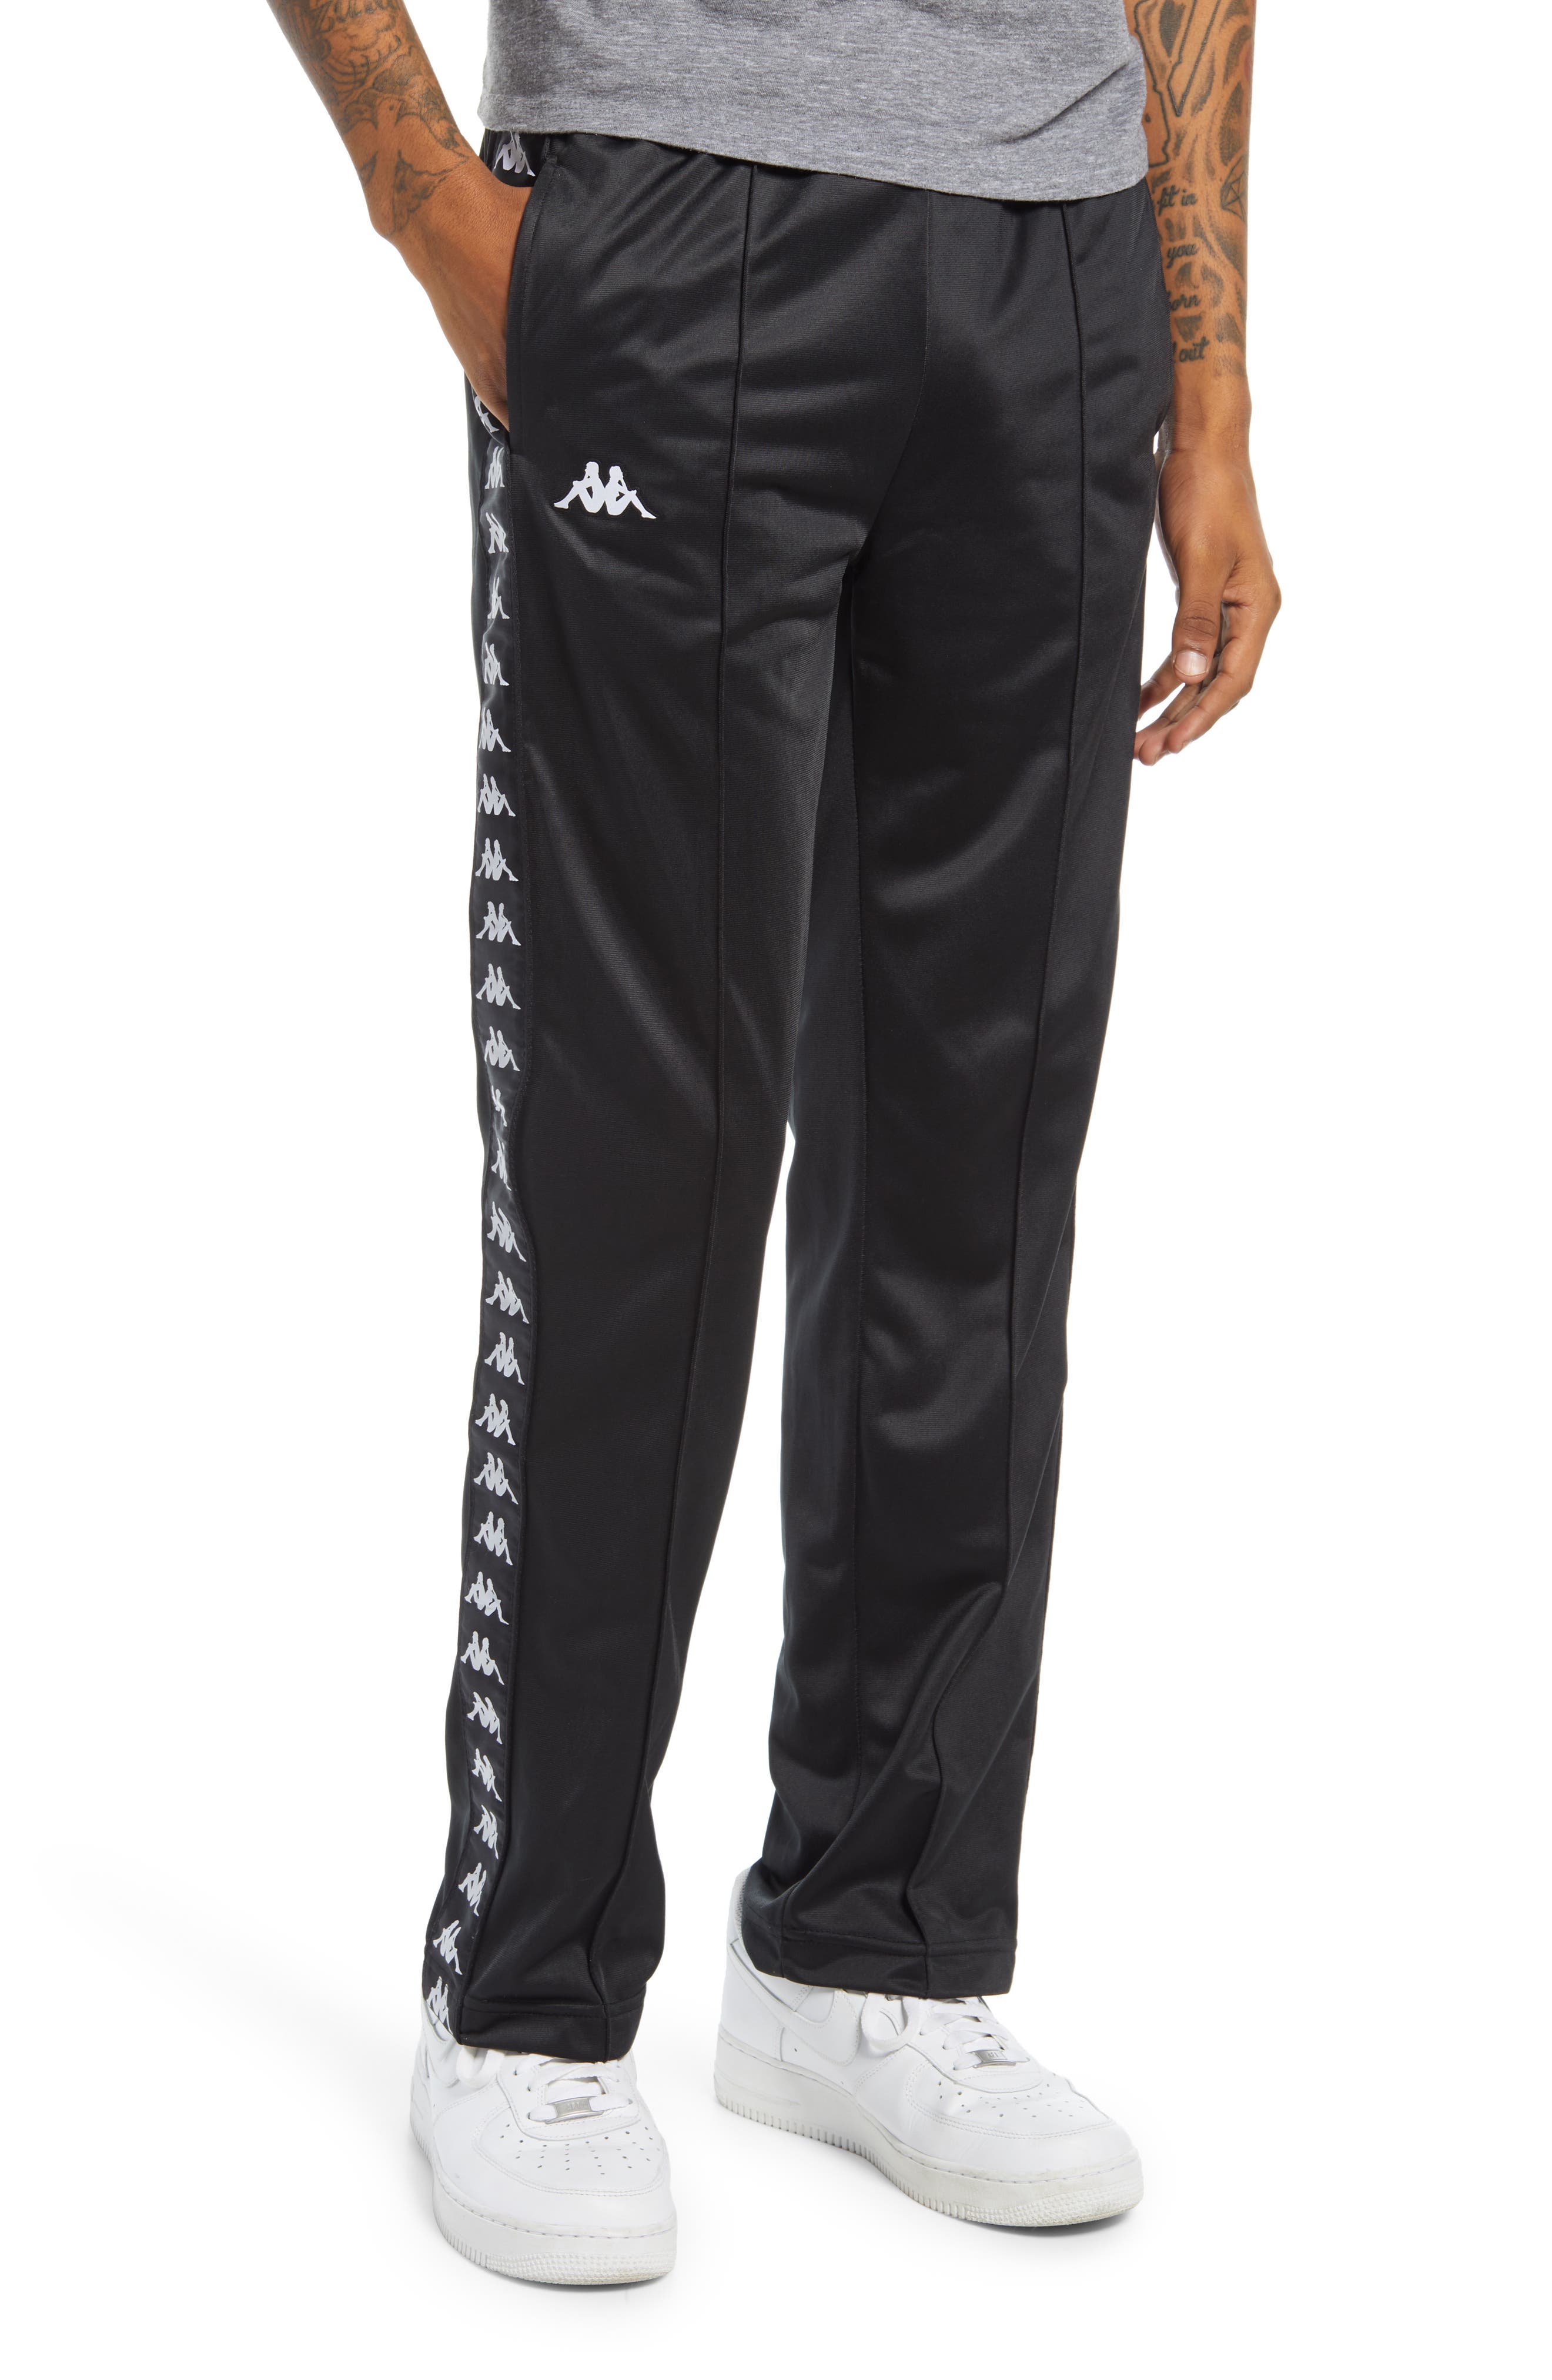 Kappa Active 222 Banda Astoriazz Slim Fit Track Pants in Black at Nordstrom, Size Small Us